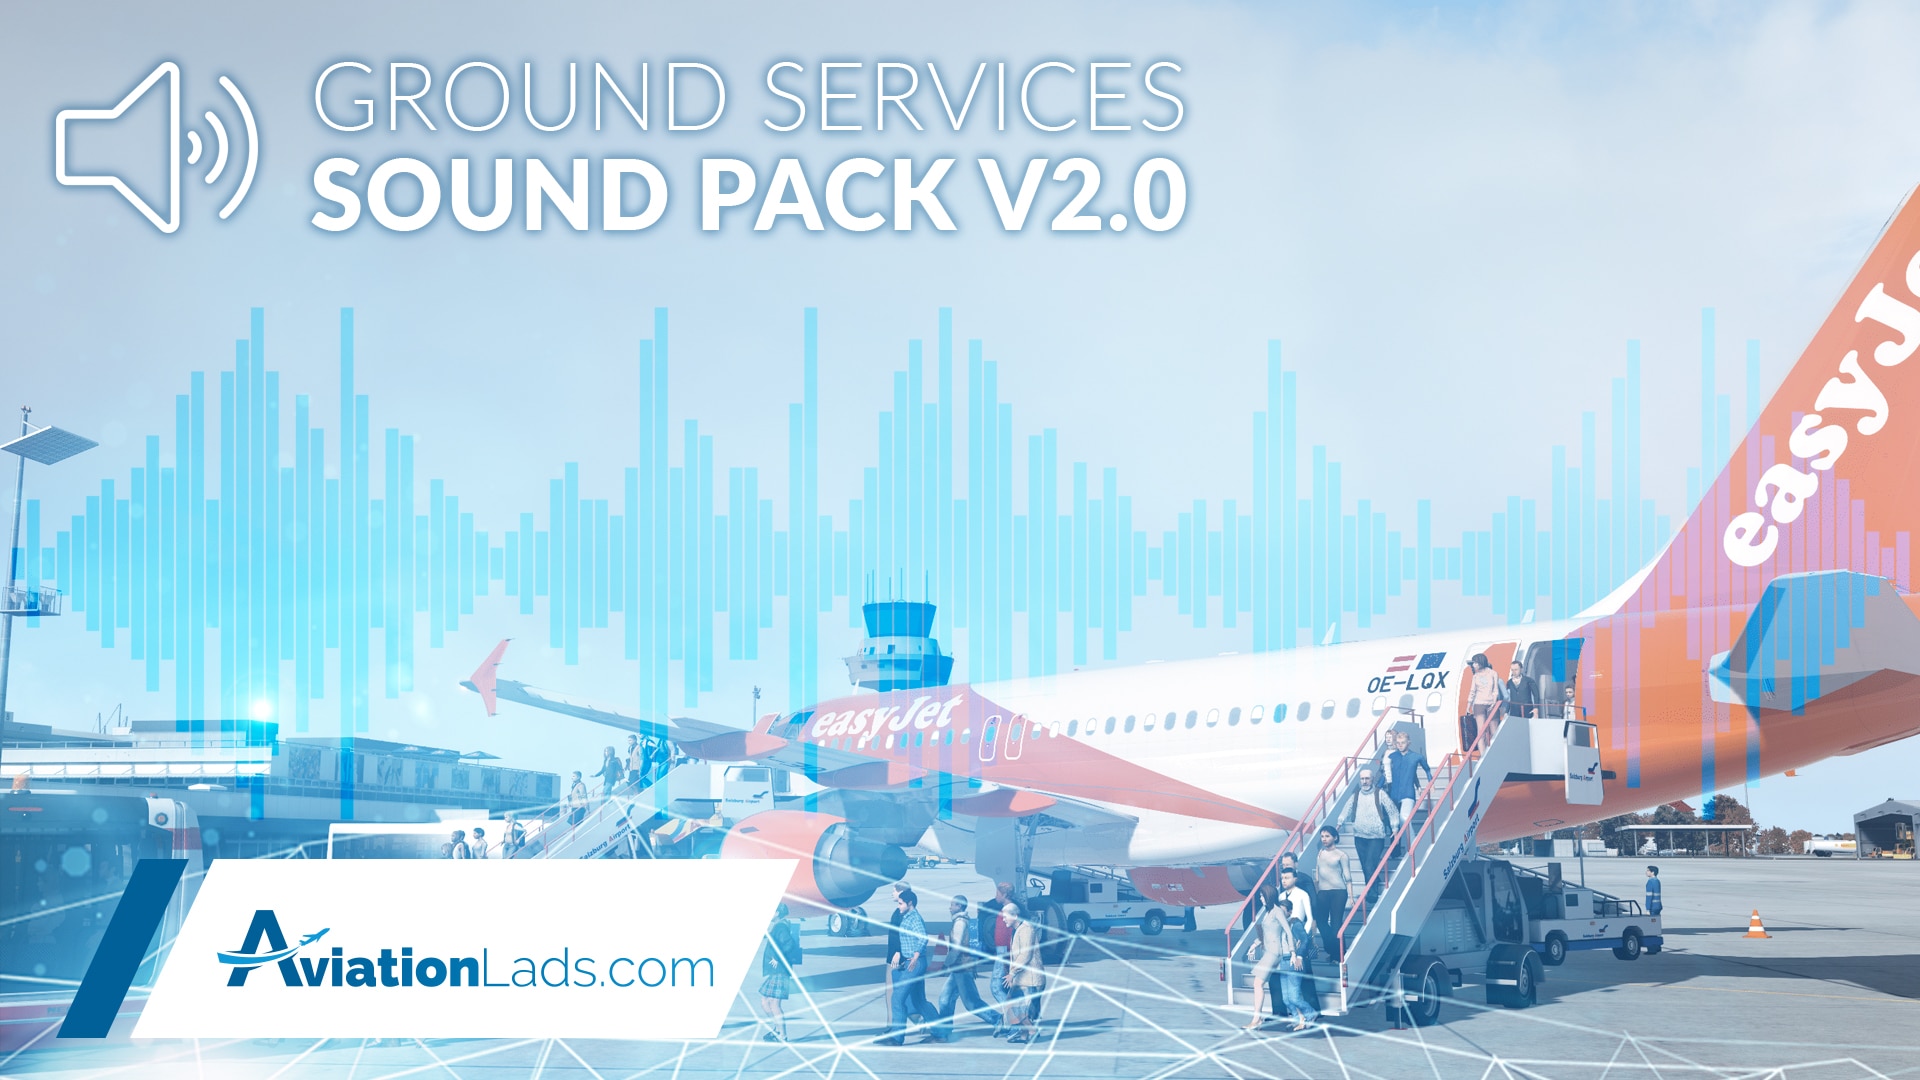 [RELEASE] Ground Services Soundpack